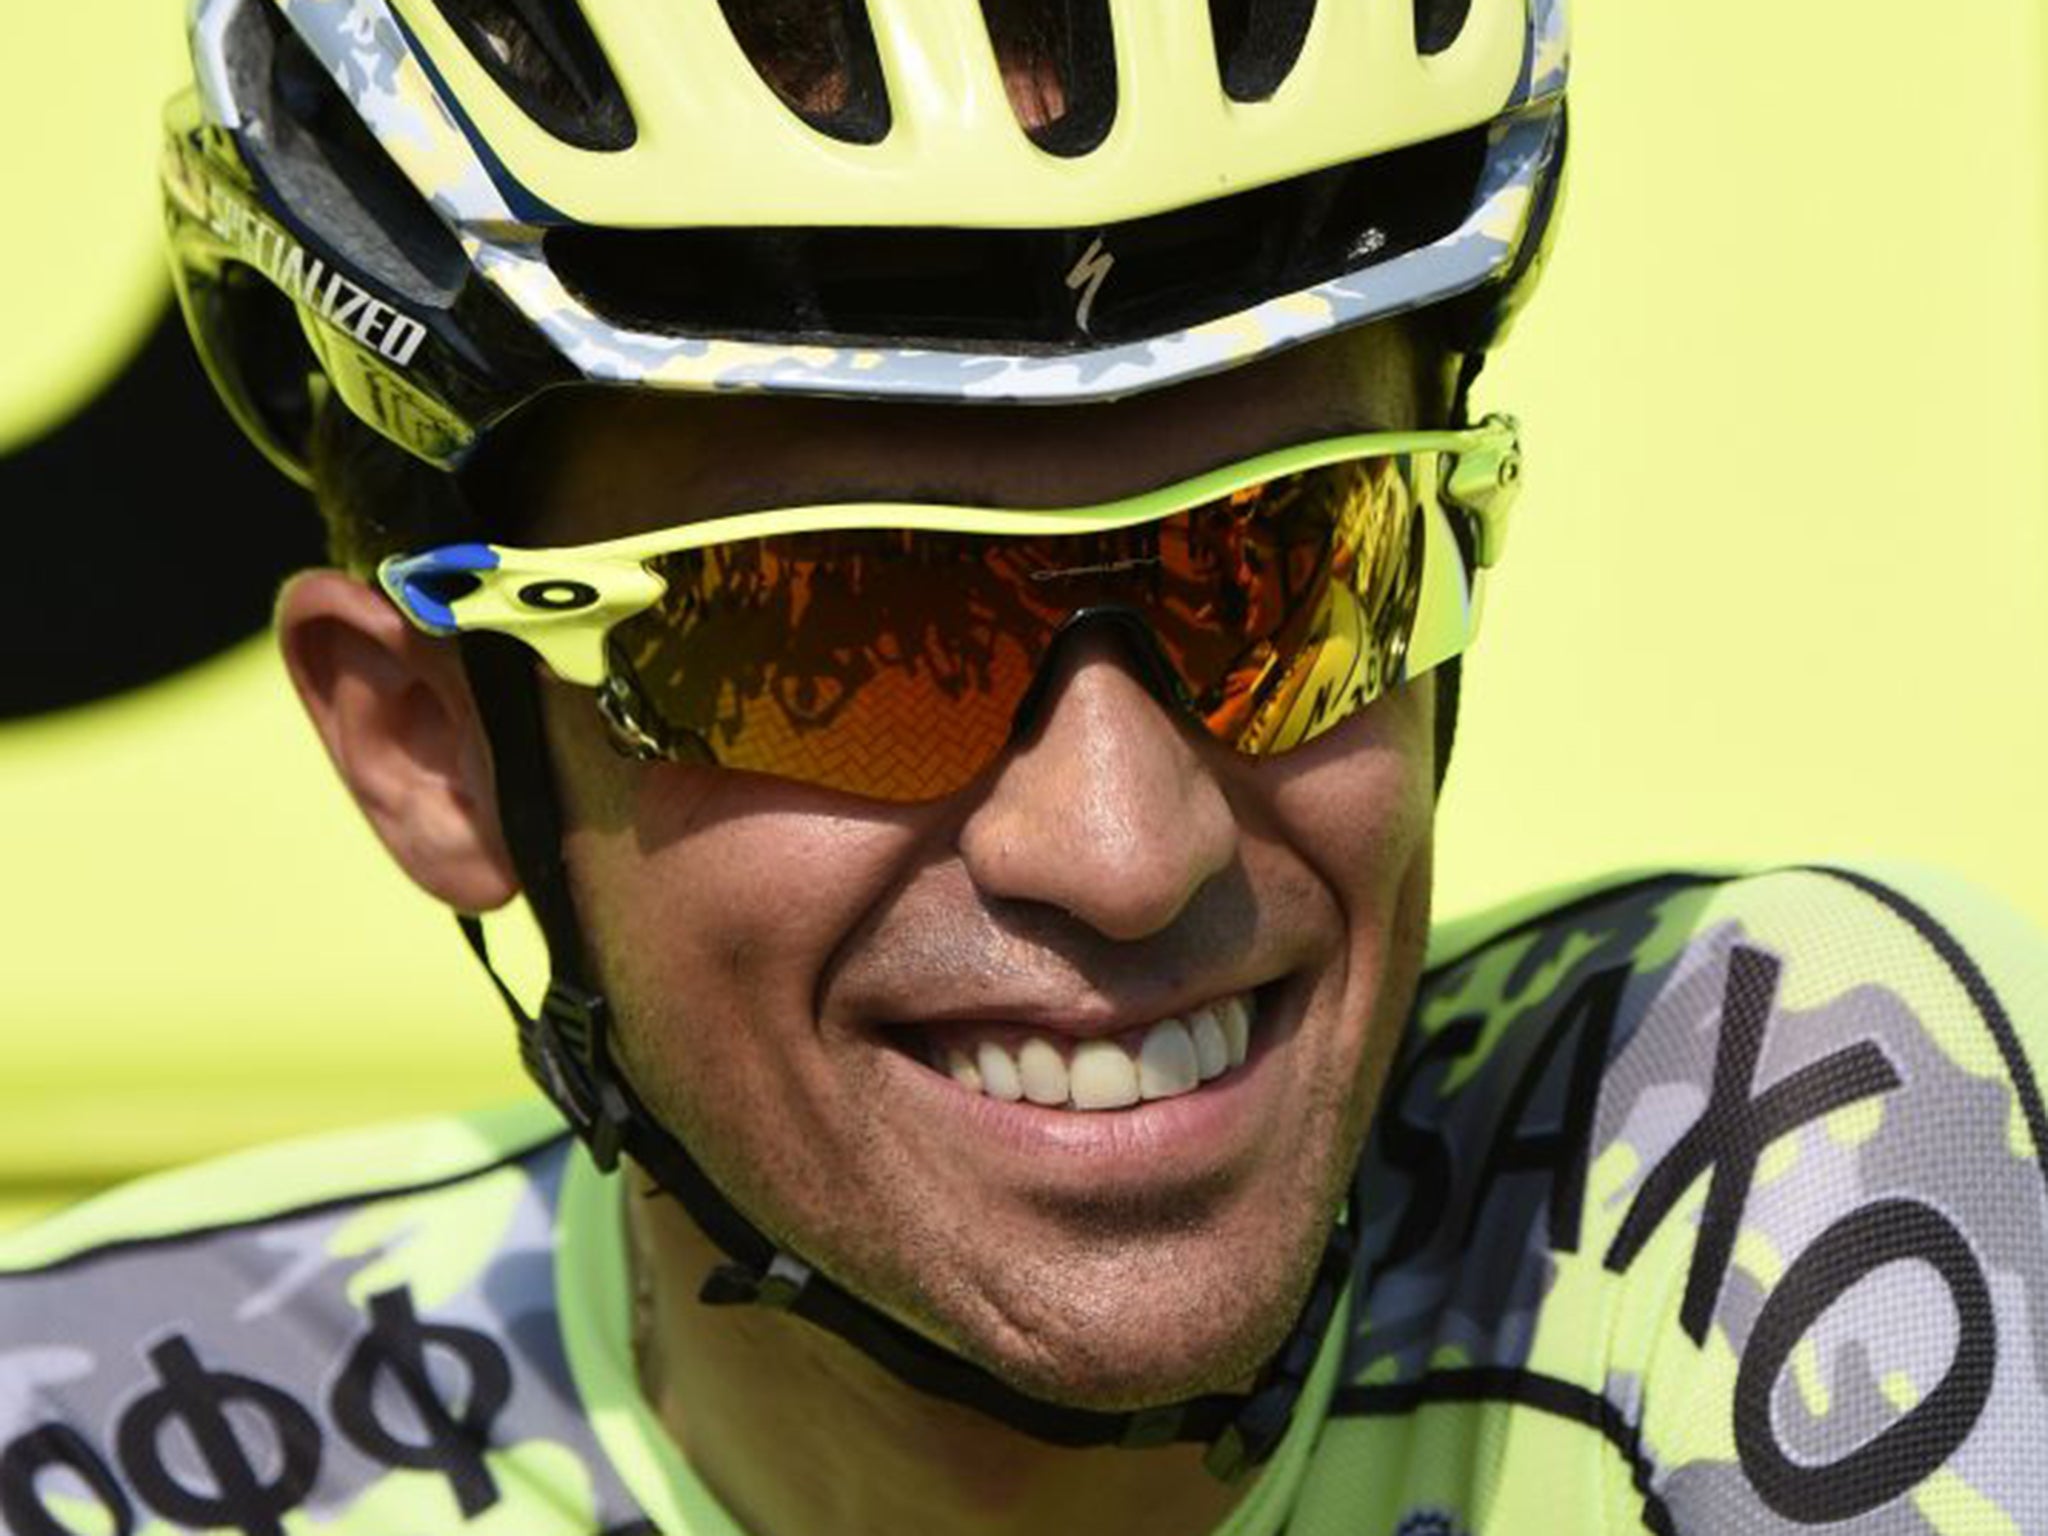 Alberto Contador said he is worried about fatigue and his ability to recover during the Tour de France